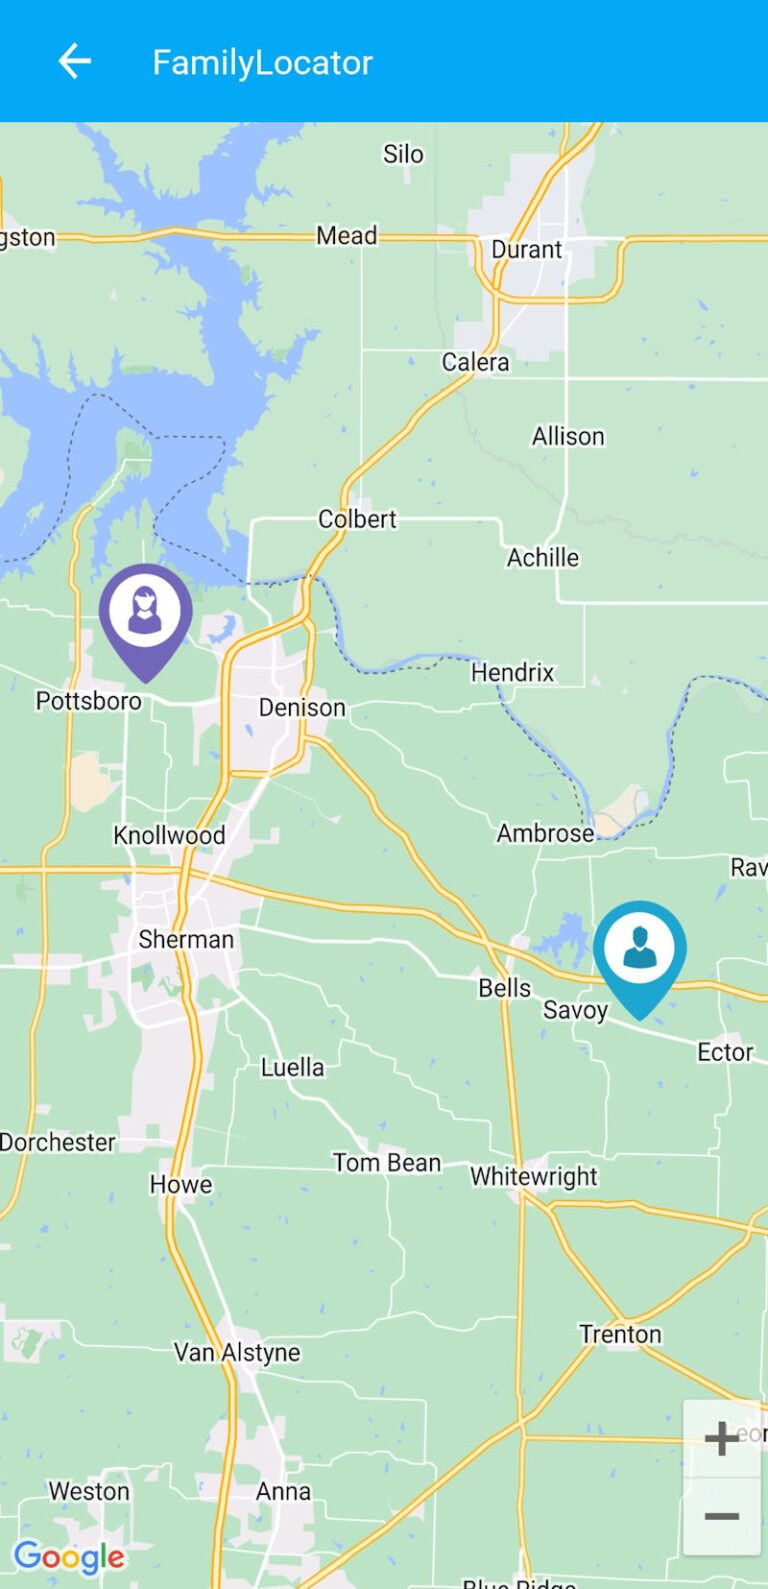 The family locator map with two family members icons on it.